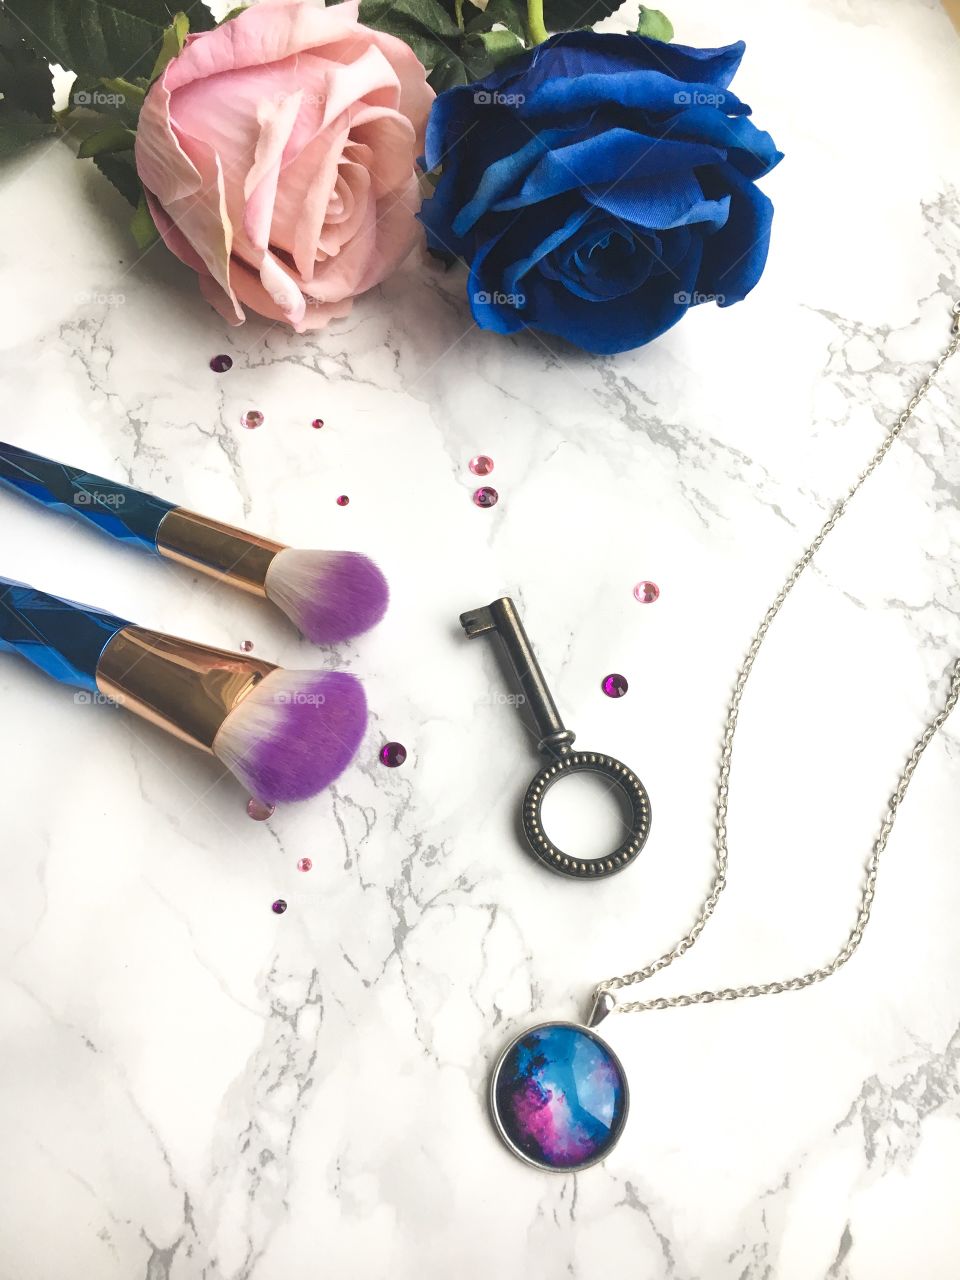 Makeup brush flat lay on a marble background with roses and jewelery.